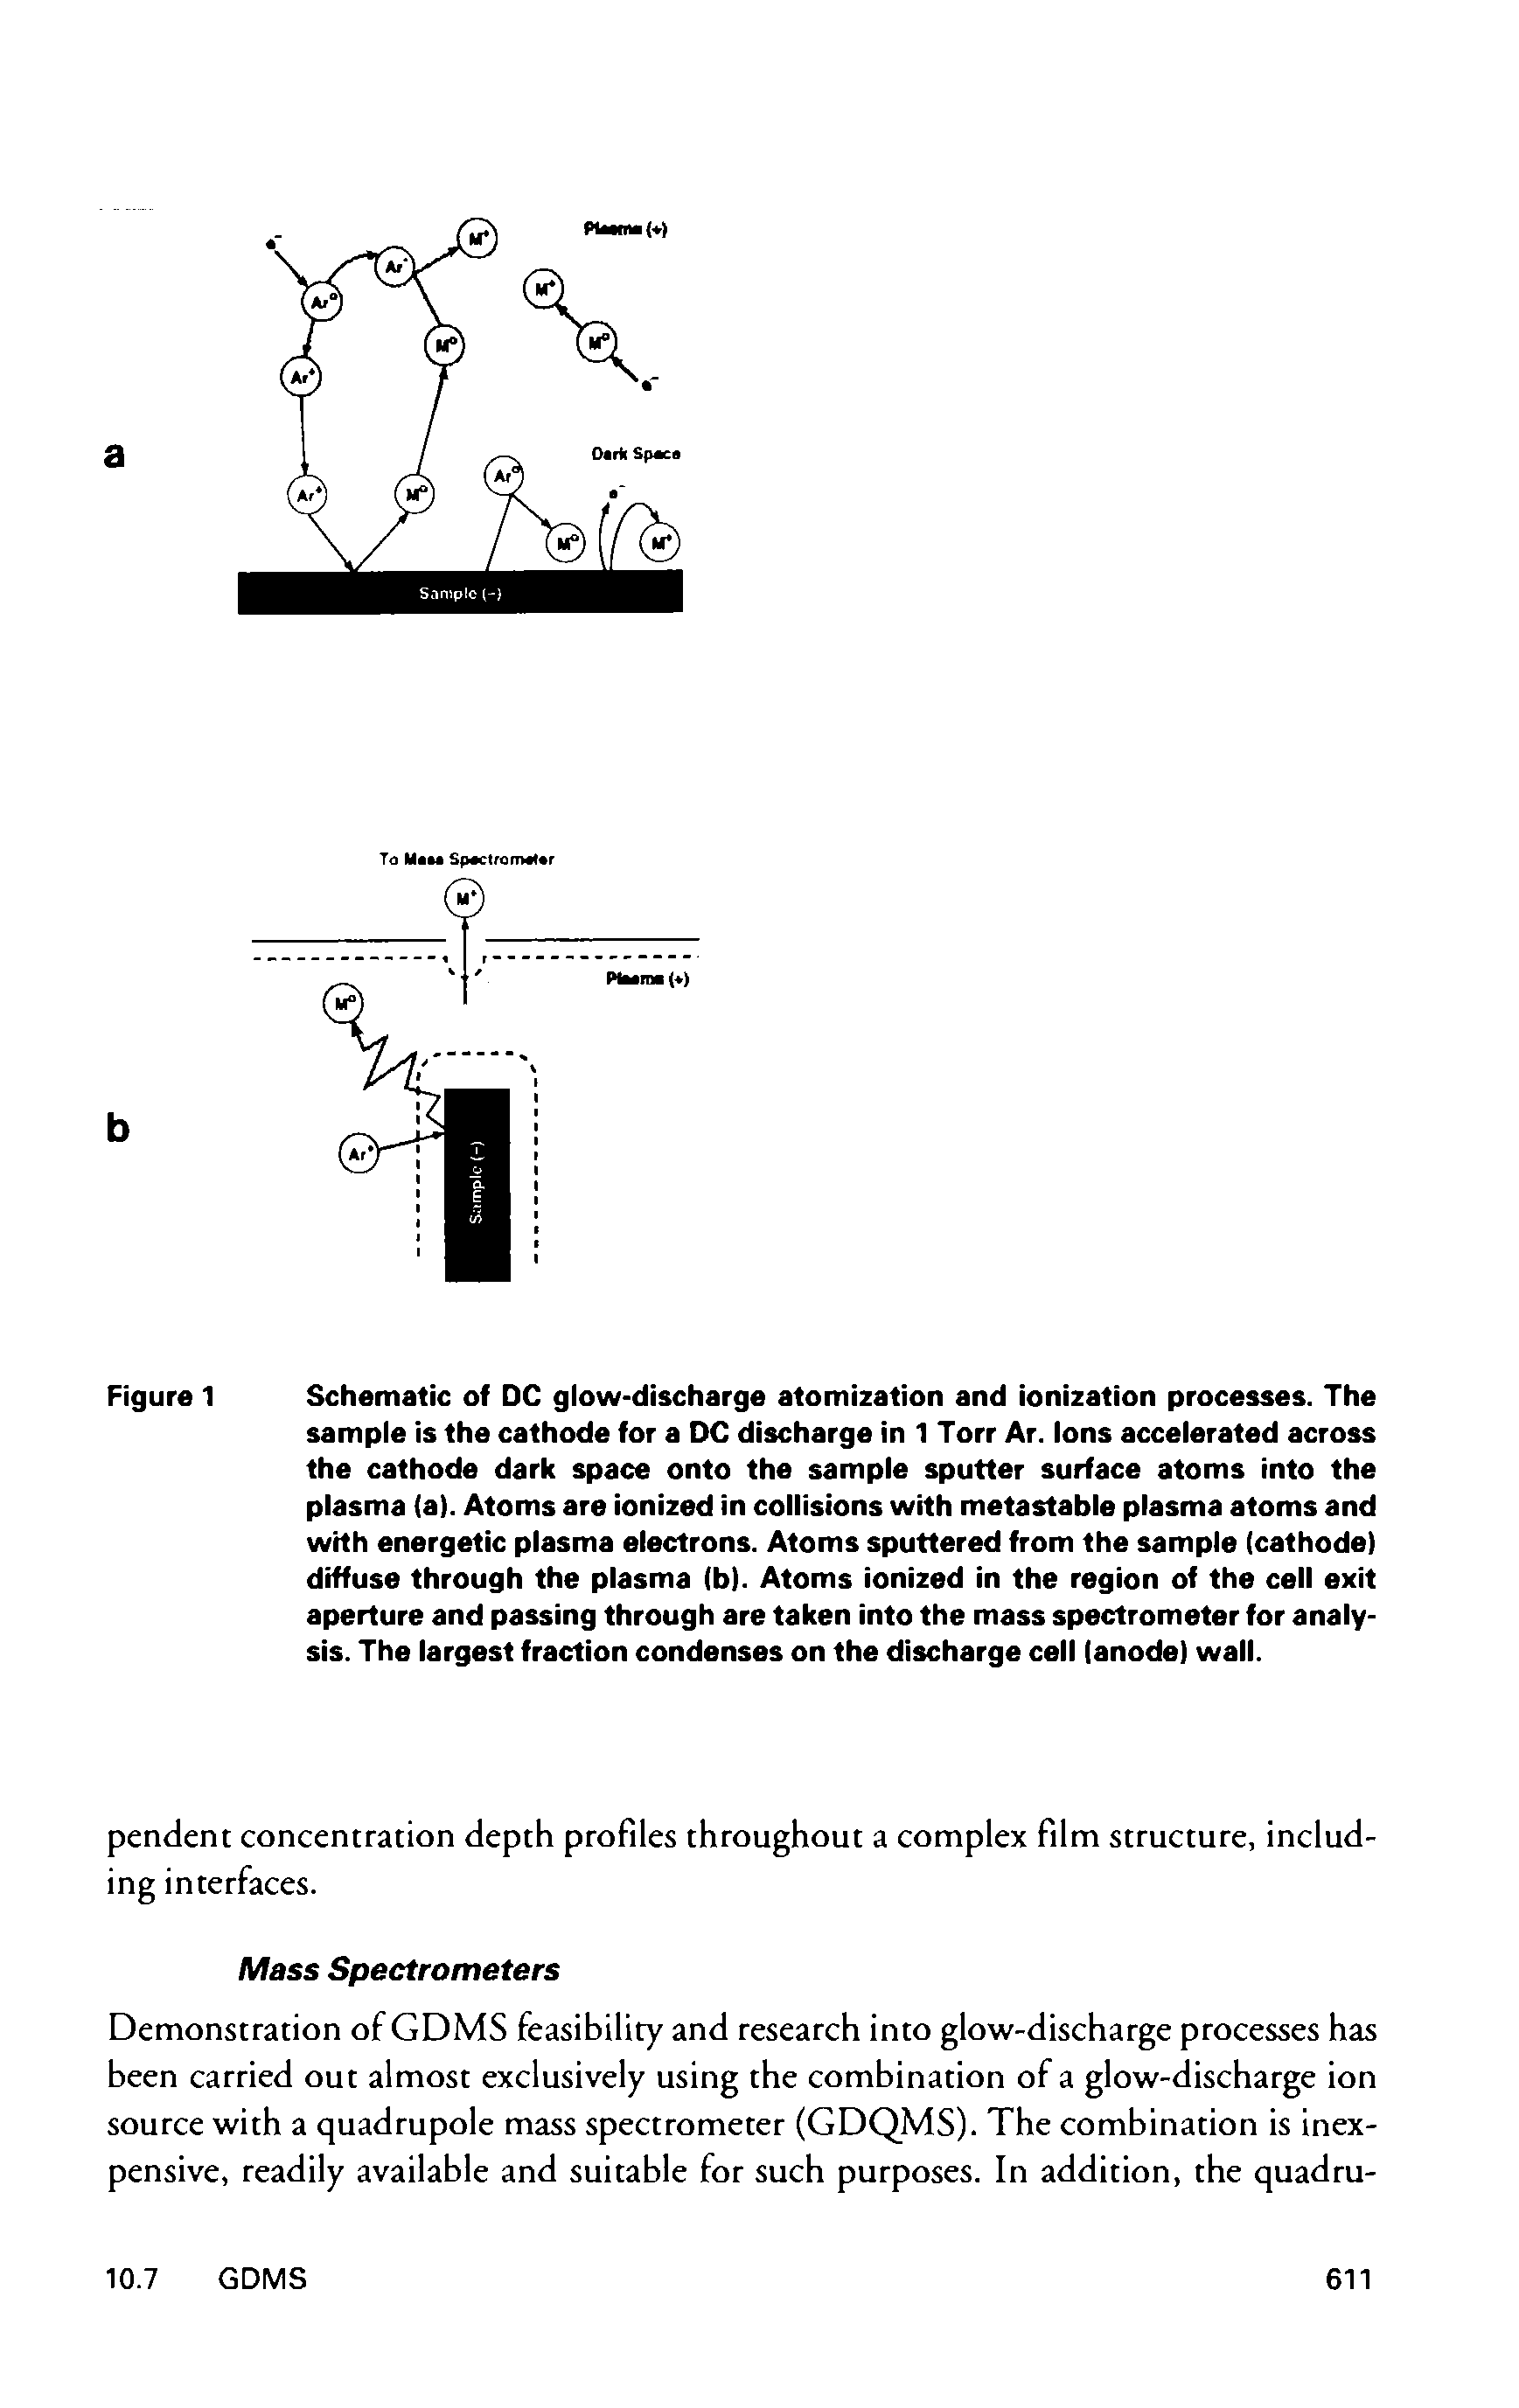 Figure 1 Schematic of DC glow-discharge atomization and ionization processes. The sample is the cathode for a DC discharge in 1 Torr Ar. Ions accelerated across the cathode dark space onto the sample sputter surface atoms into the plasma (a). Atoms are ionized in collisions with metastable plasma atoms and with energetic plasma electrons. Atoms sputtered from the sample (cathode) diffuse through the plasma (b). Atoms ionized in the region of the cell exit aperture and passing through are taken into the mass spectrometer for analysis. The largest fraction condenses on the discharge cell (anode) wall.